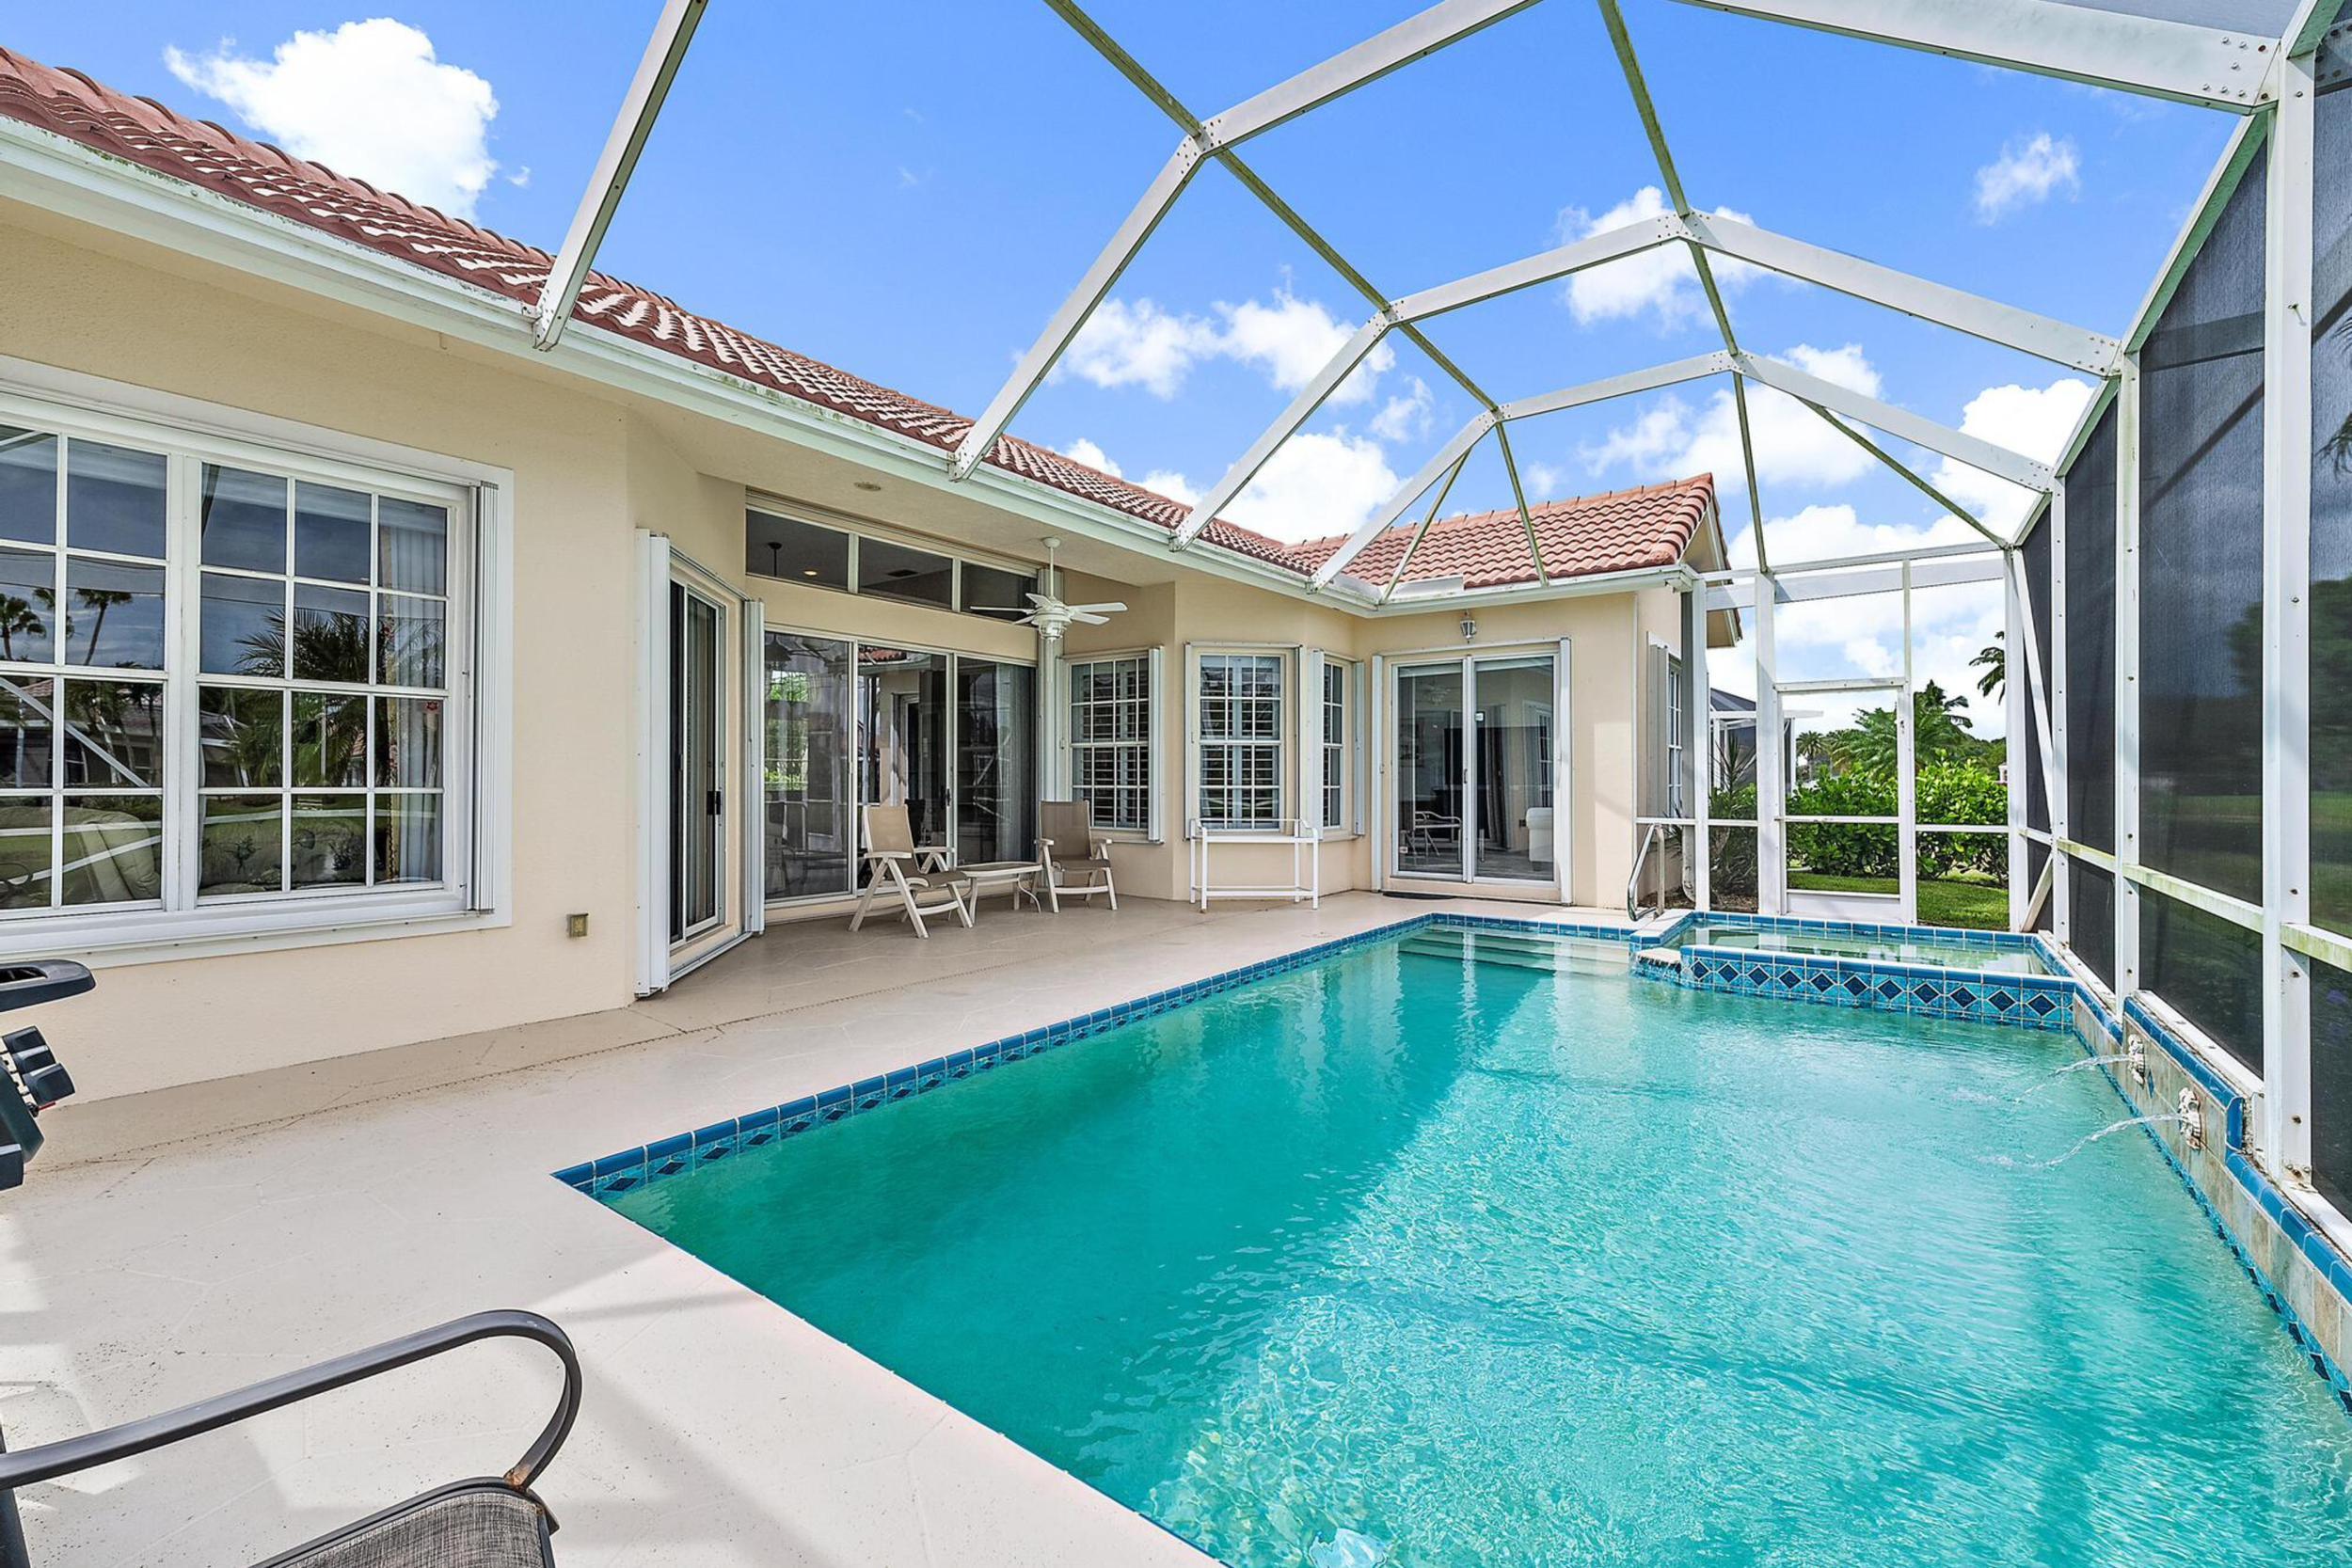 pool home for sale in PGA National by top realtors